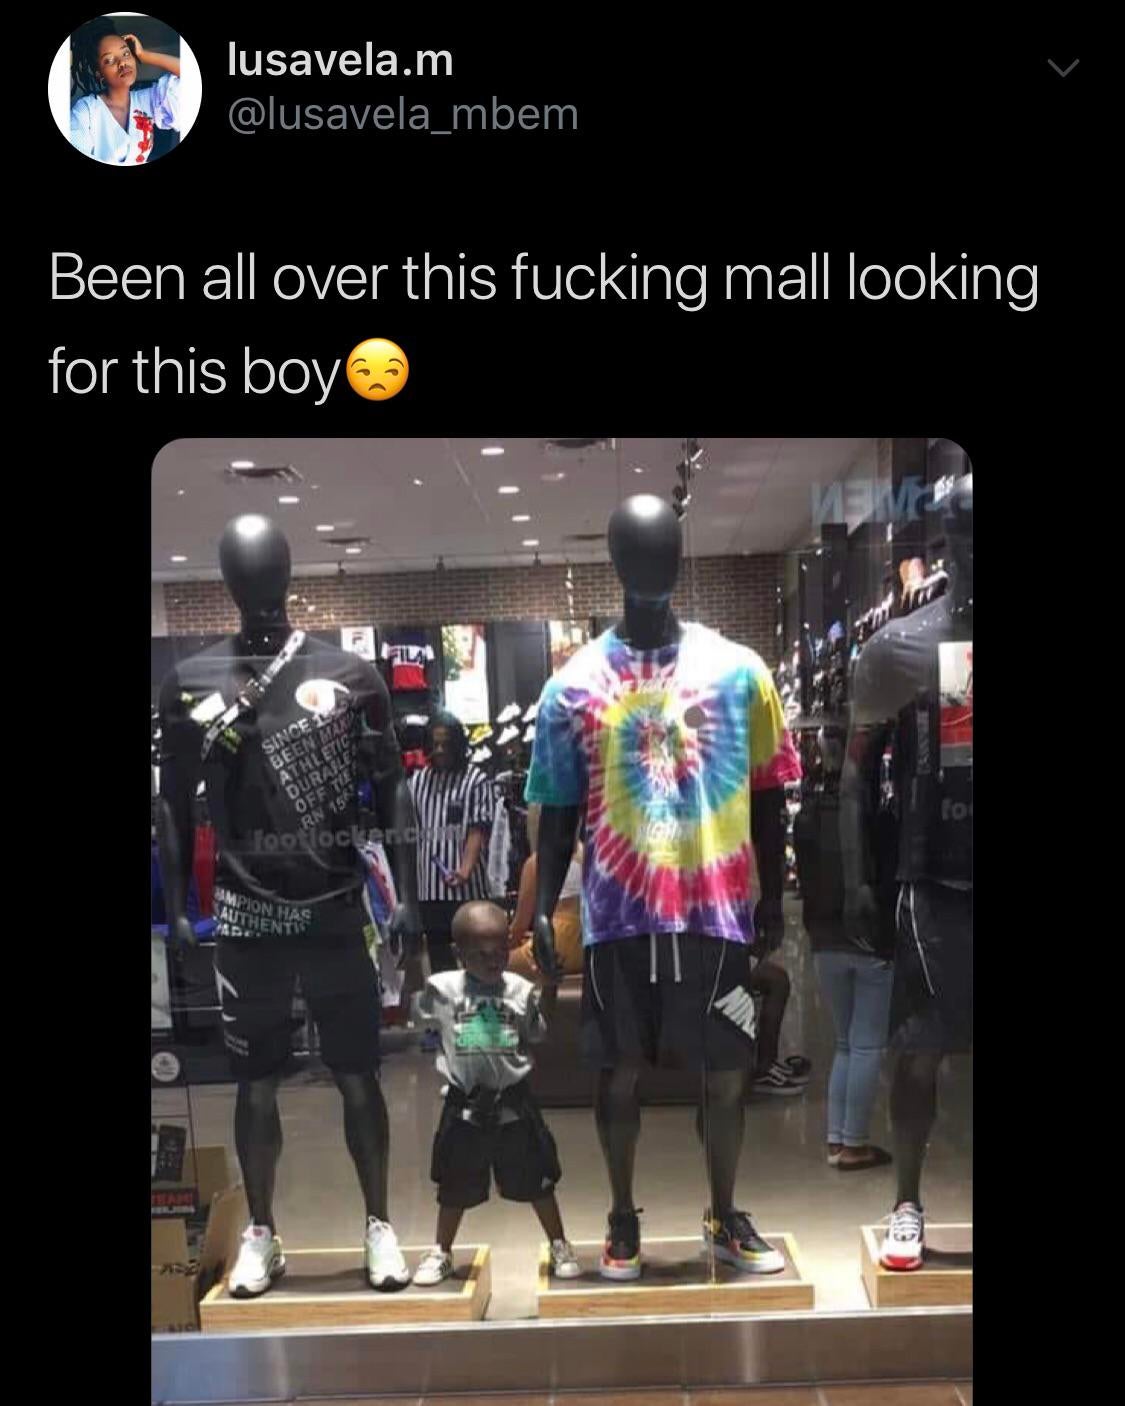 display window - lusavela.m Been all over this fucking mall looking for this boy Oot clerc Con Has